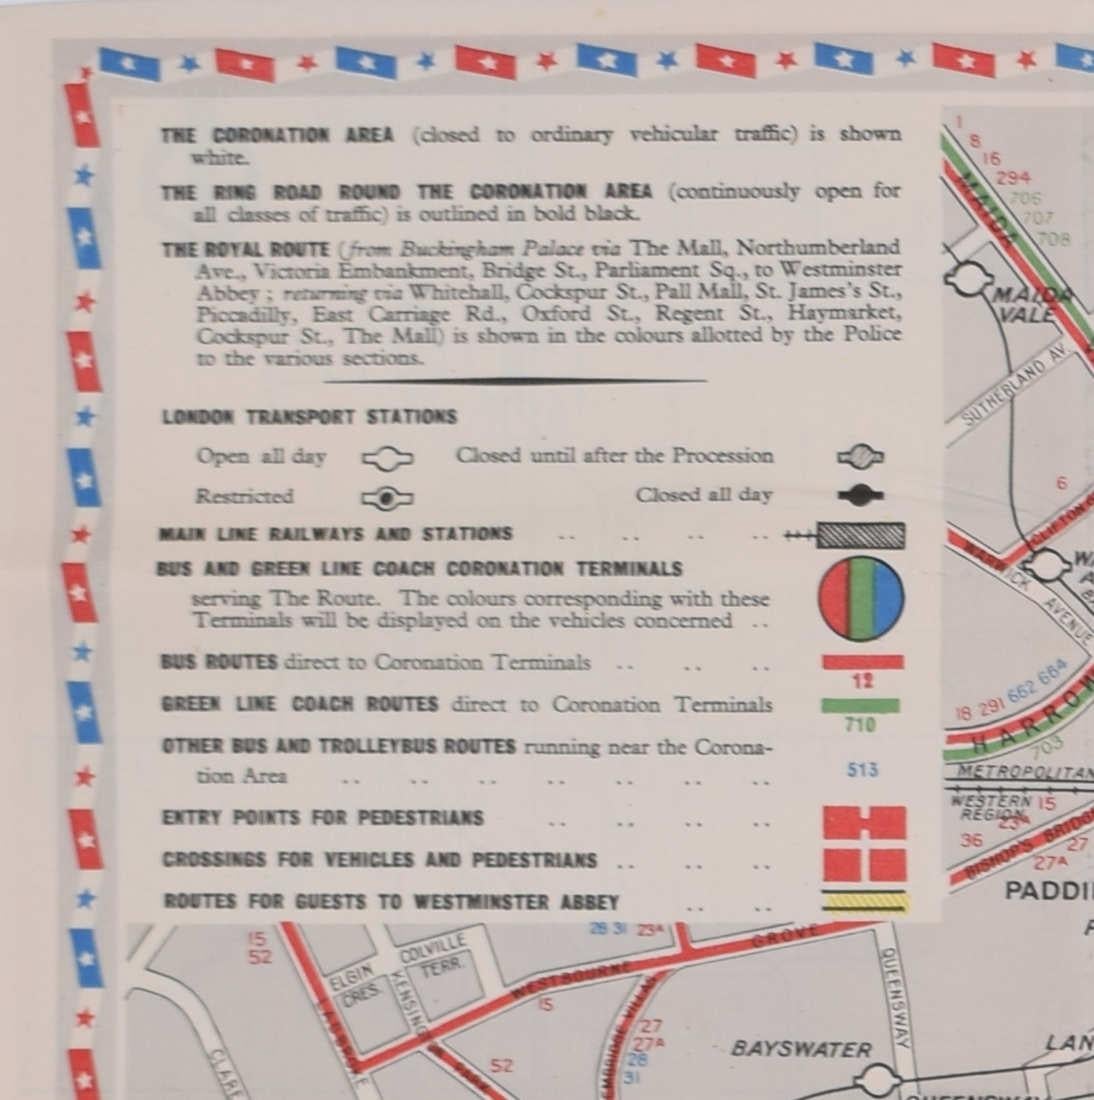 1953 Coronation Map for London Transport - Print by Unknown